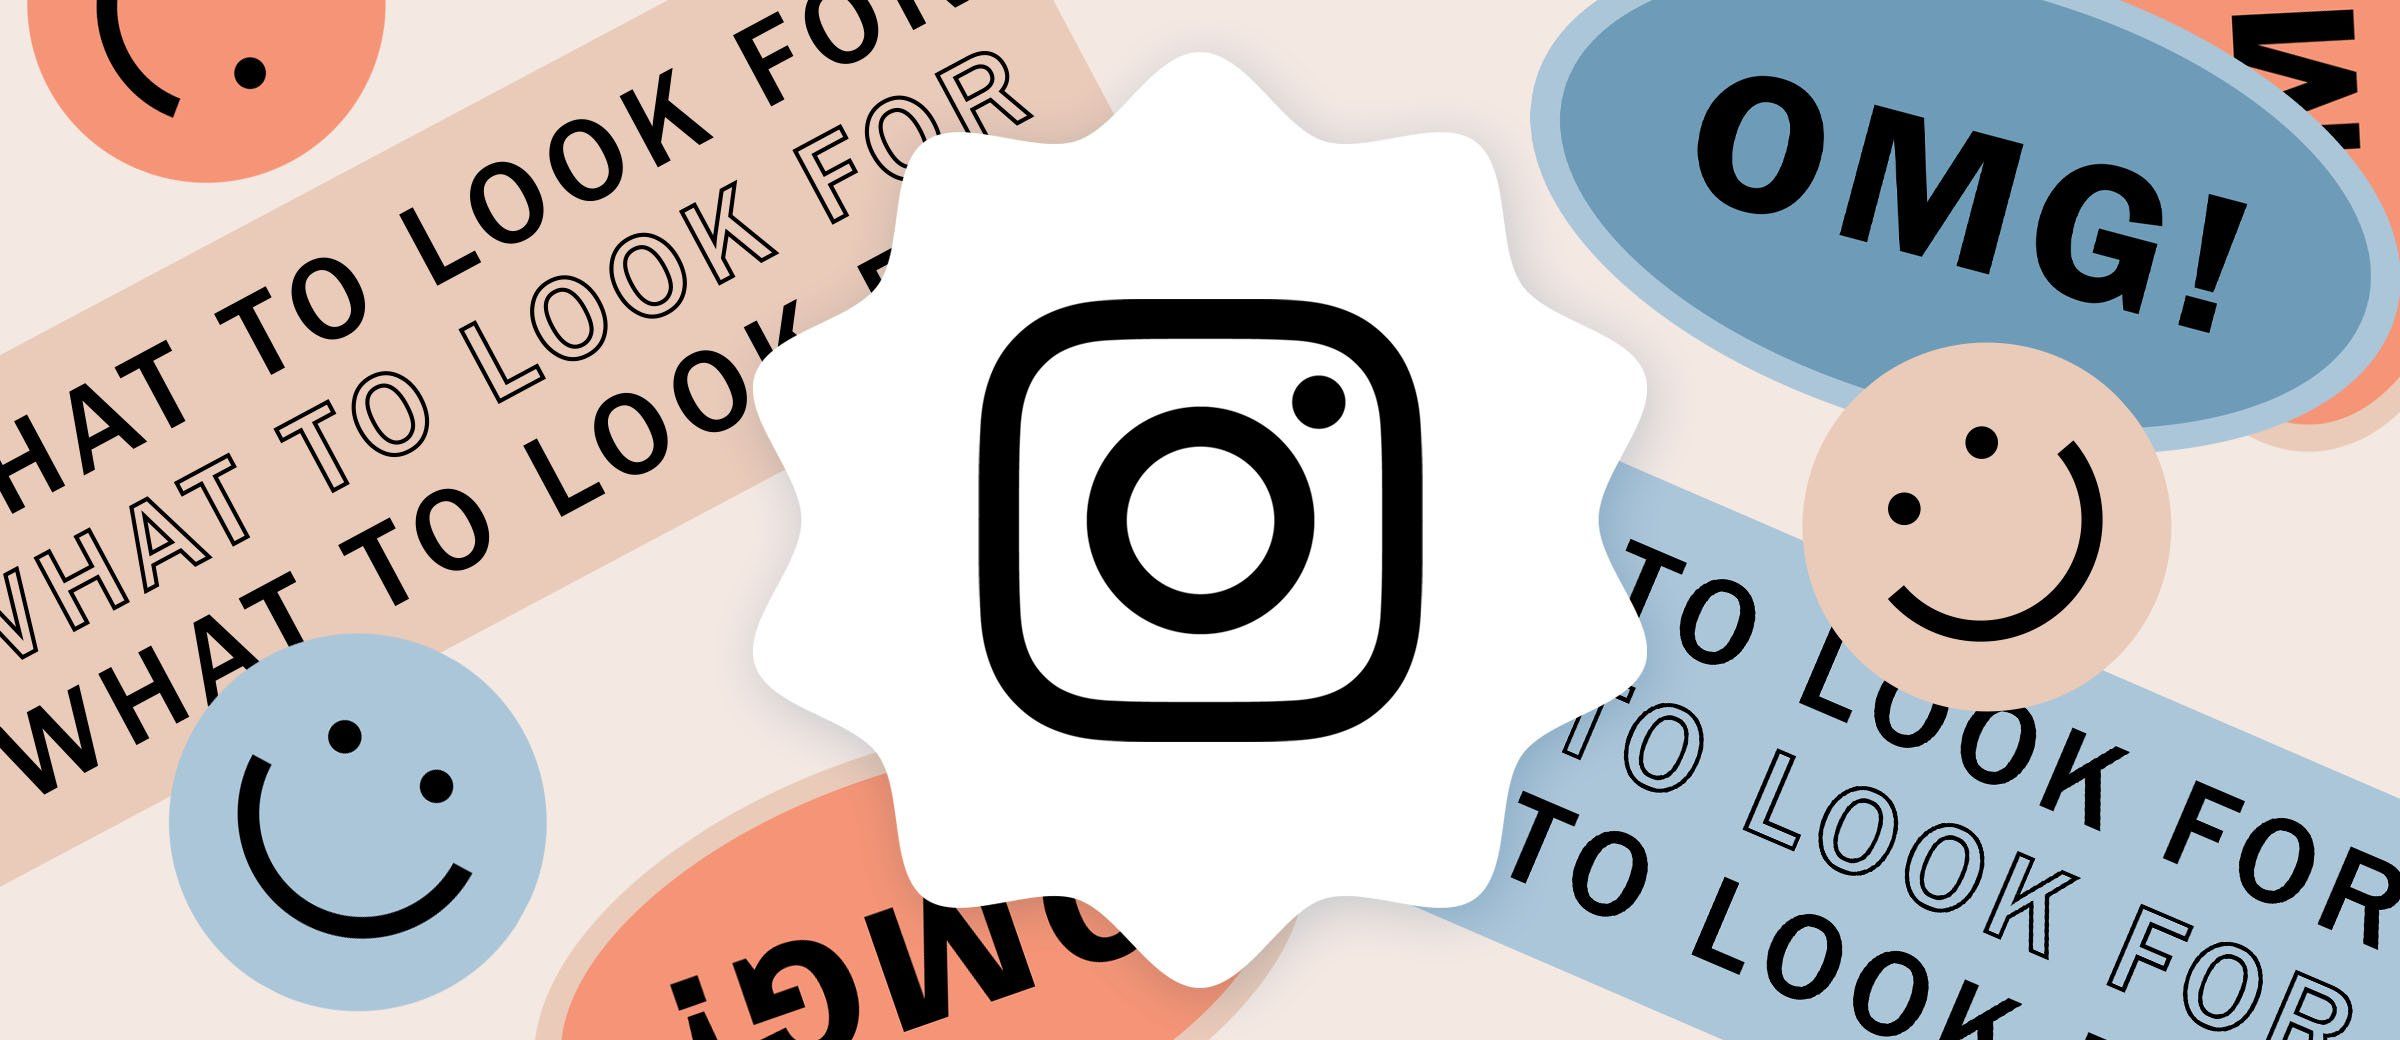 Instagram Update 2022: A Roundup of Instagram's Newest Features, by carrie-boswell